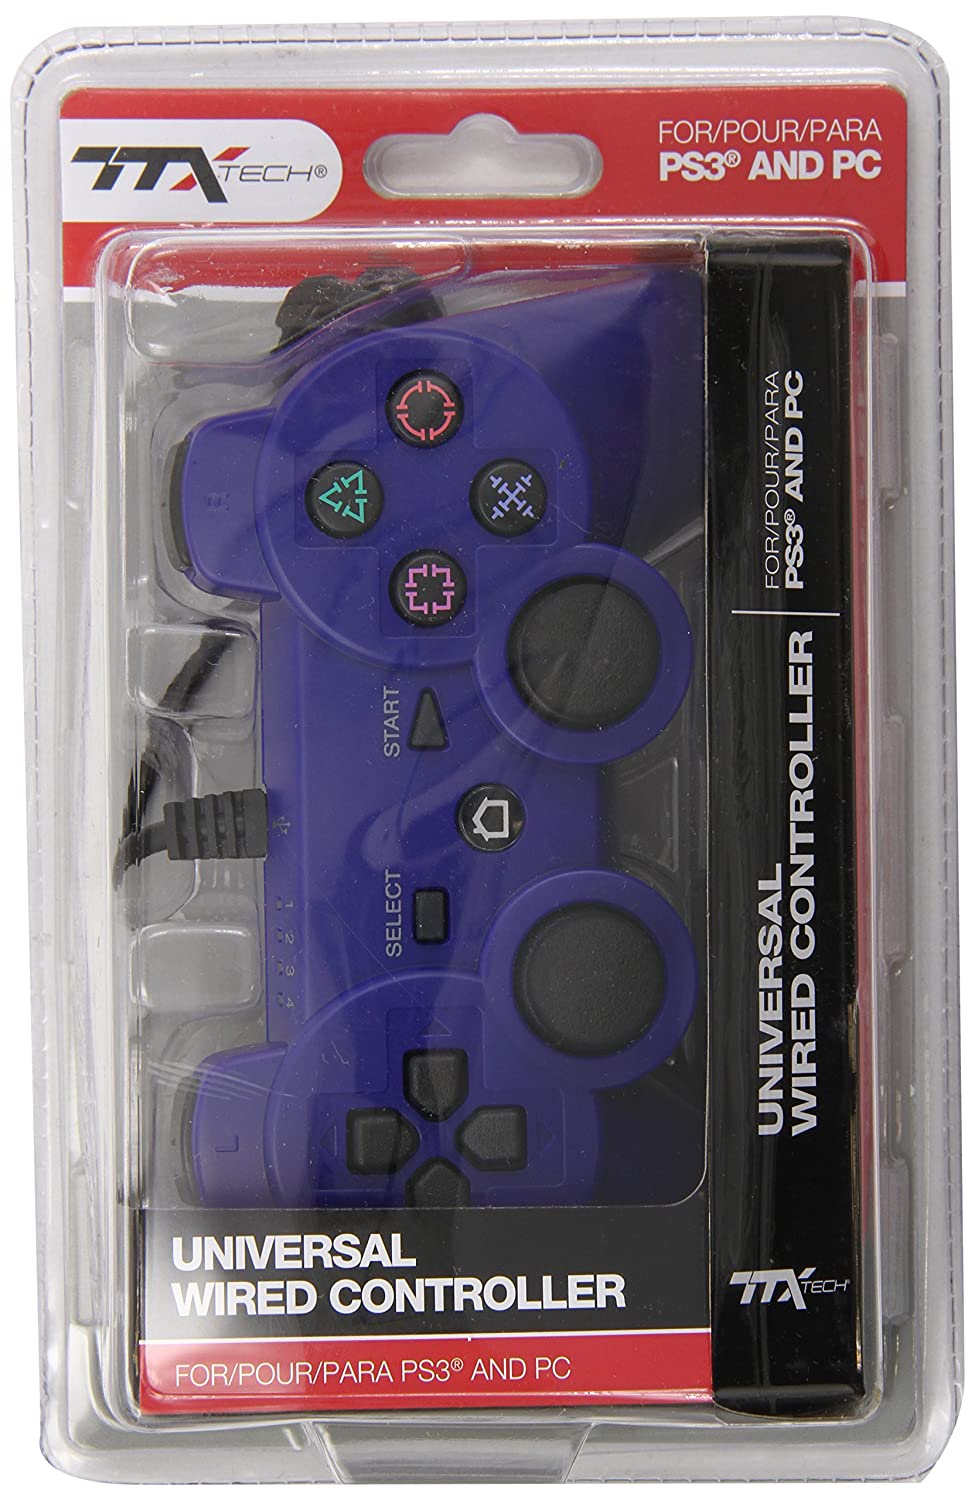 Ttx tech universal wired controller driver for mac